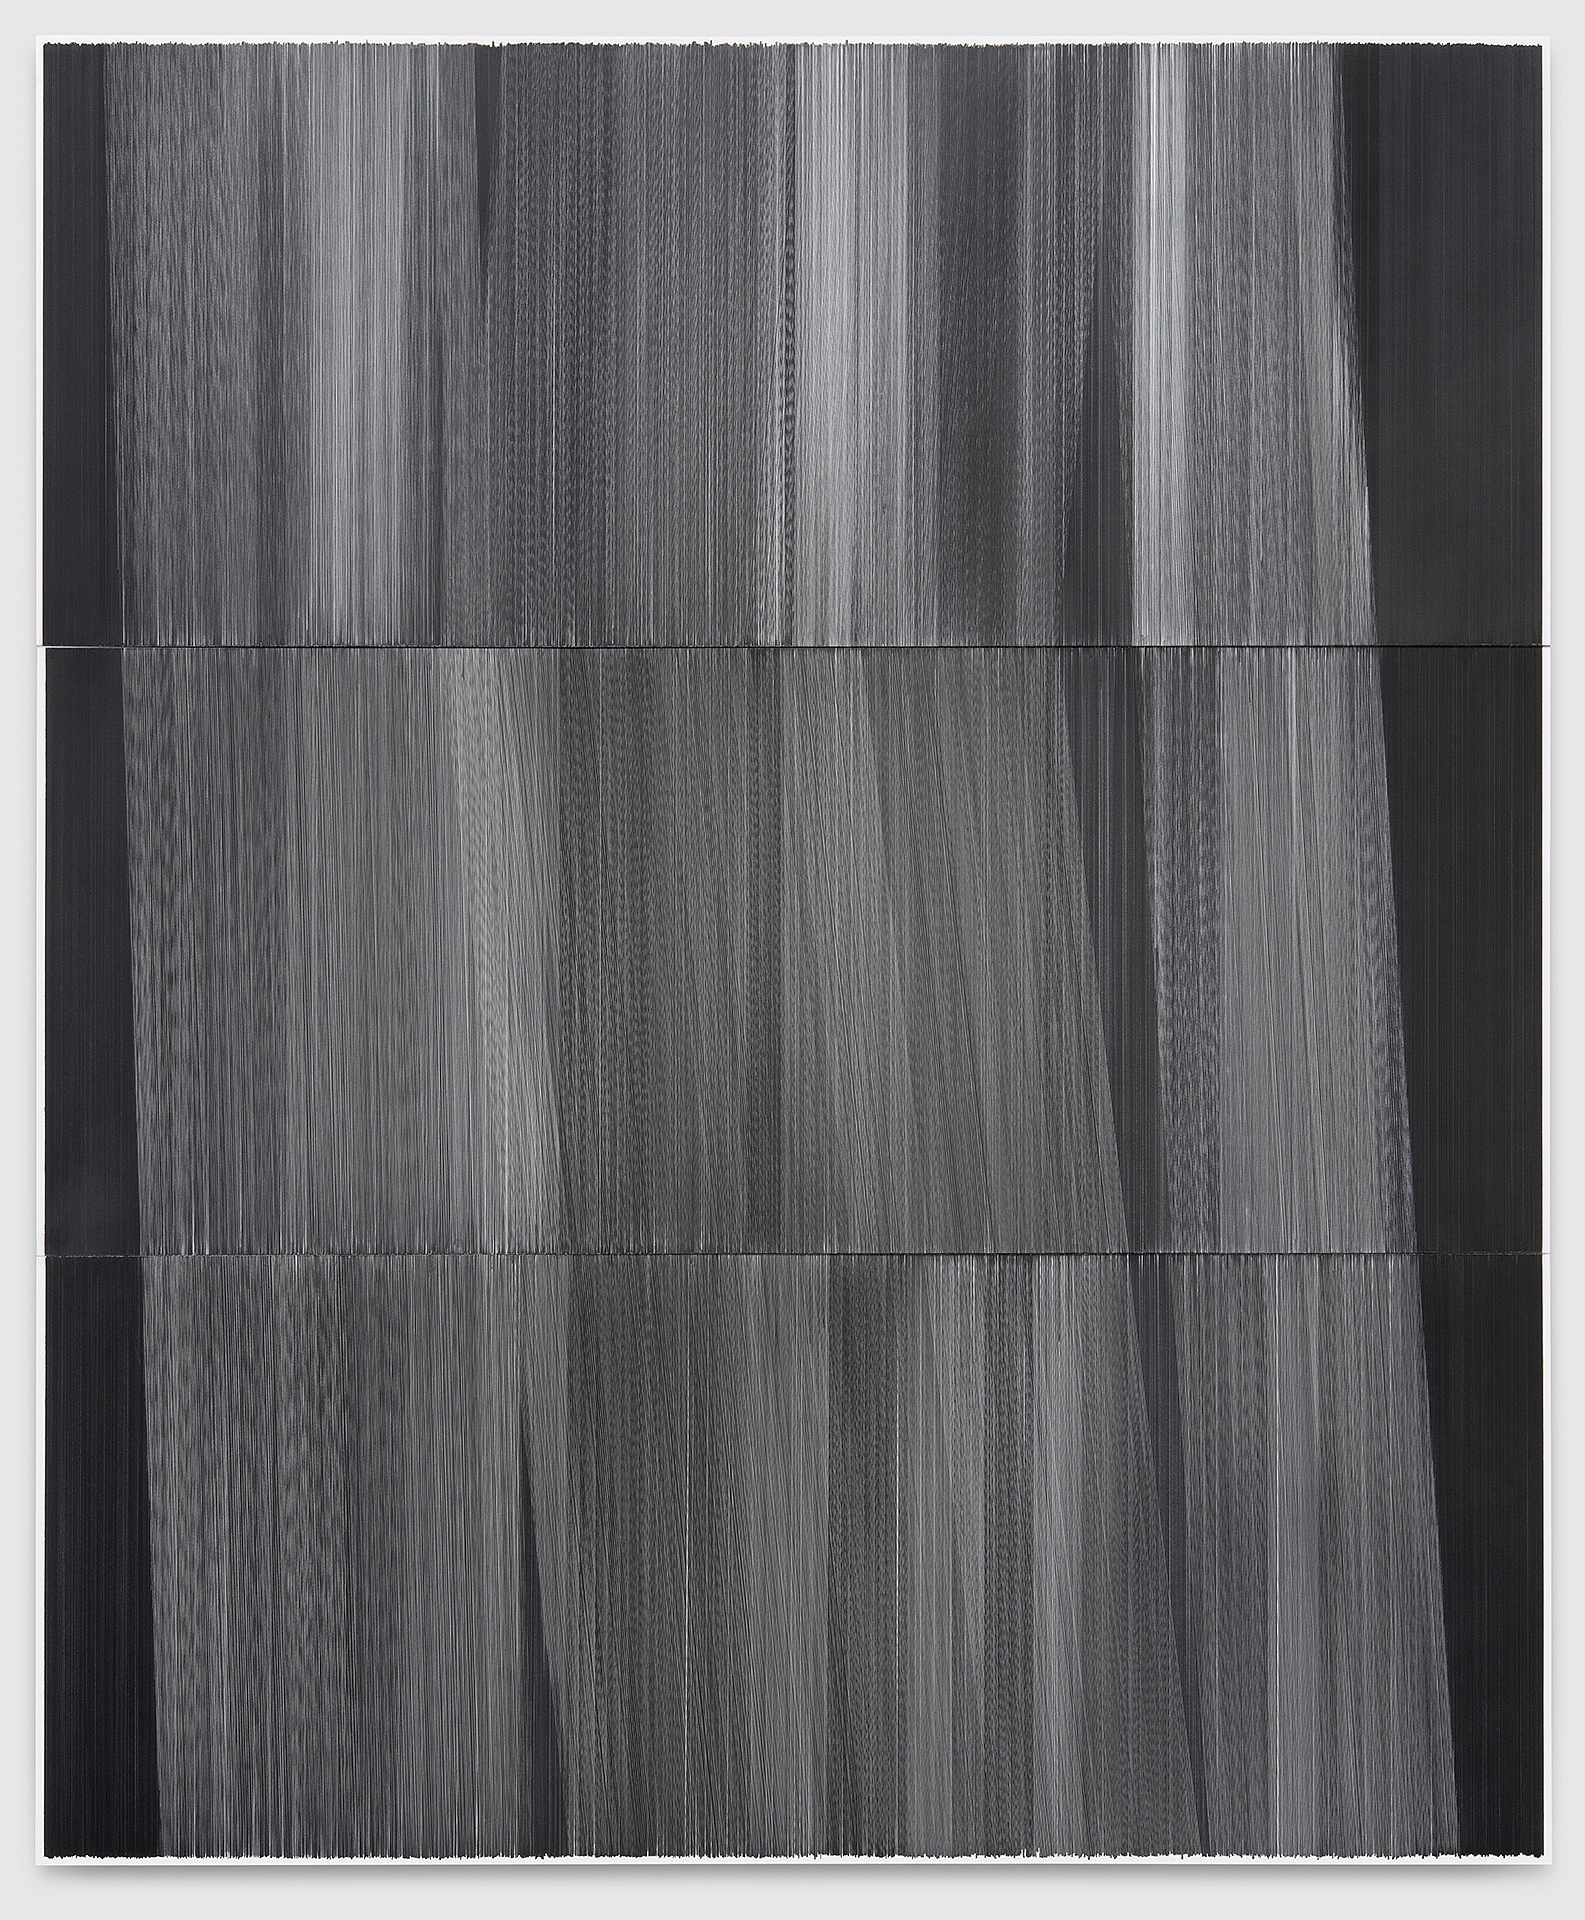    field drawing 02   2015 graphite on mat board 55 x 66 inches 